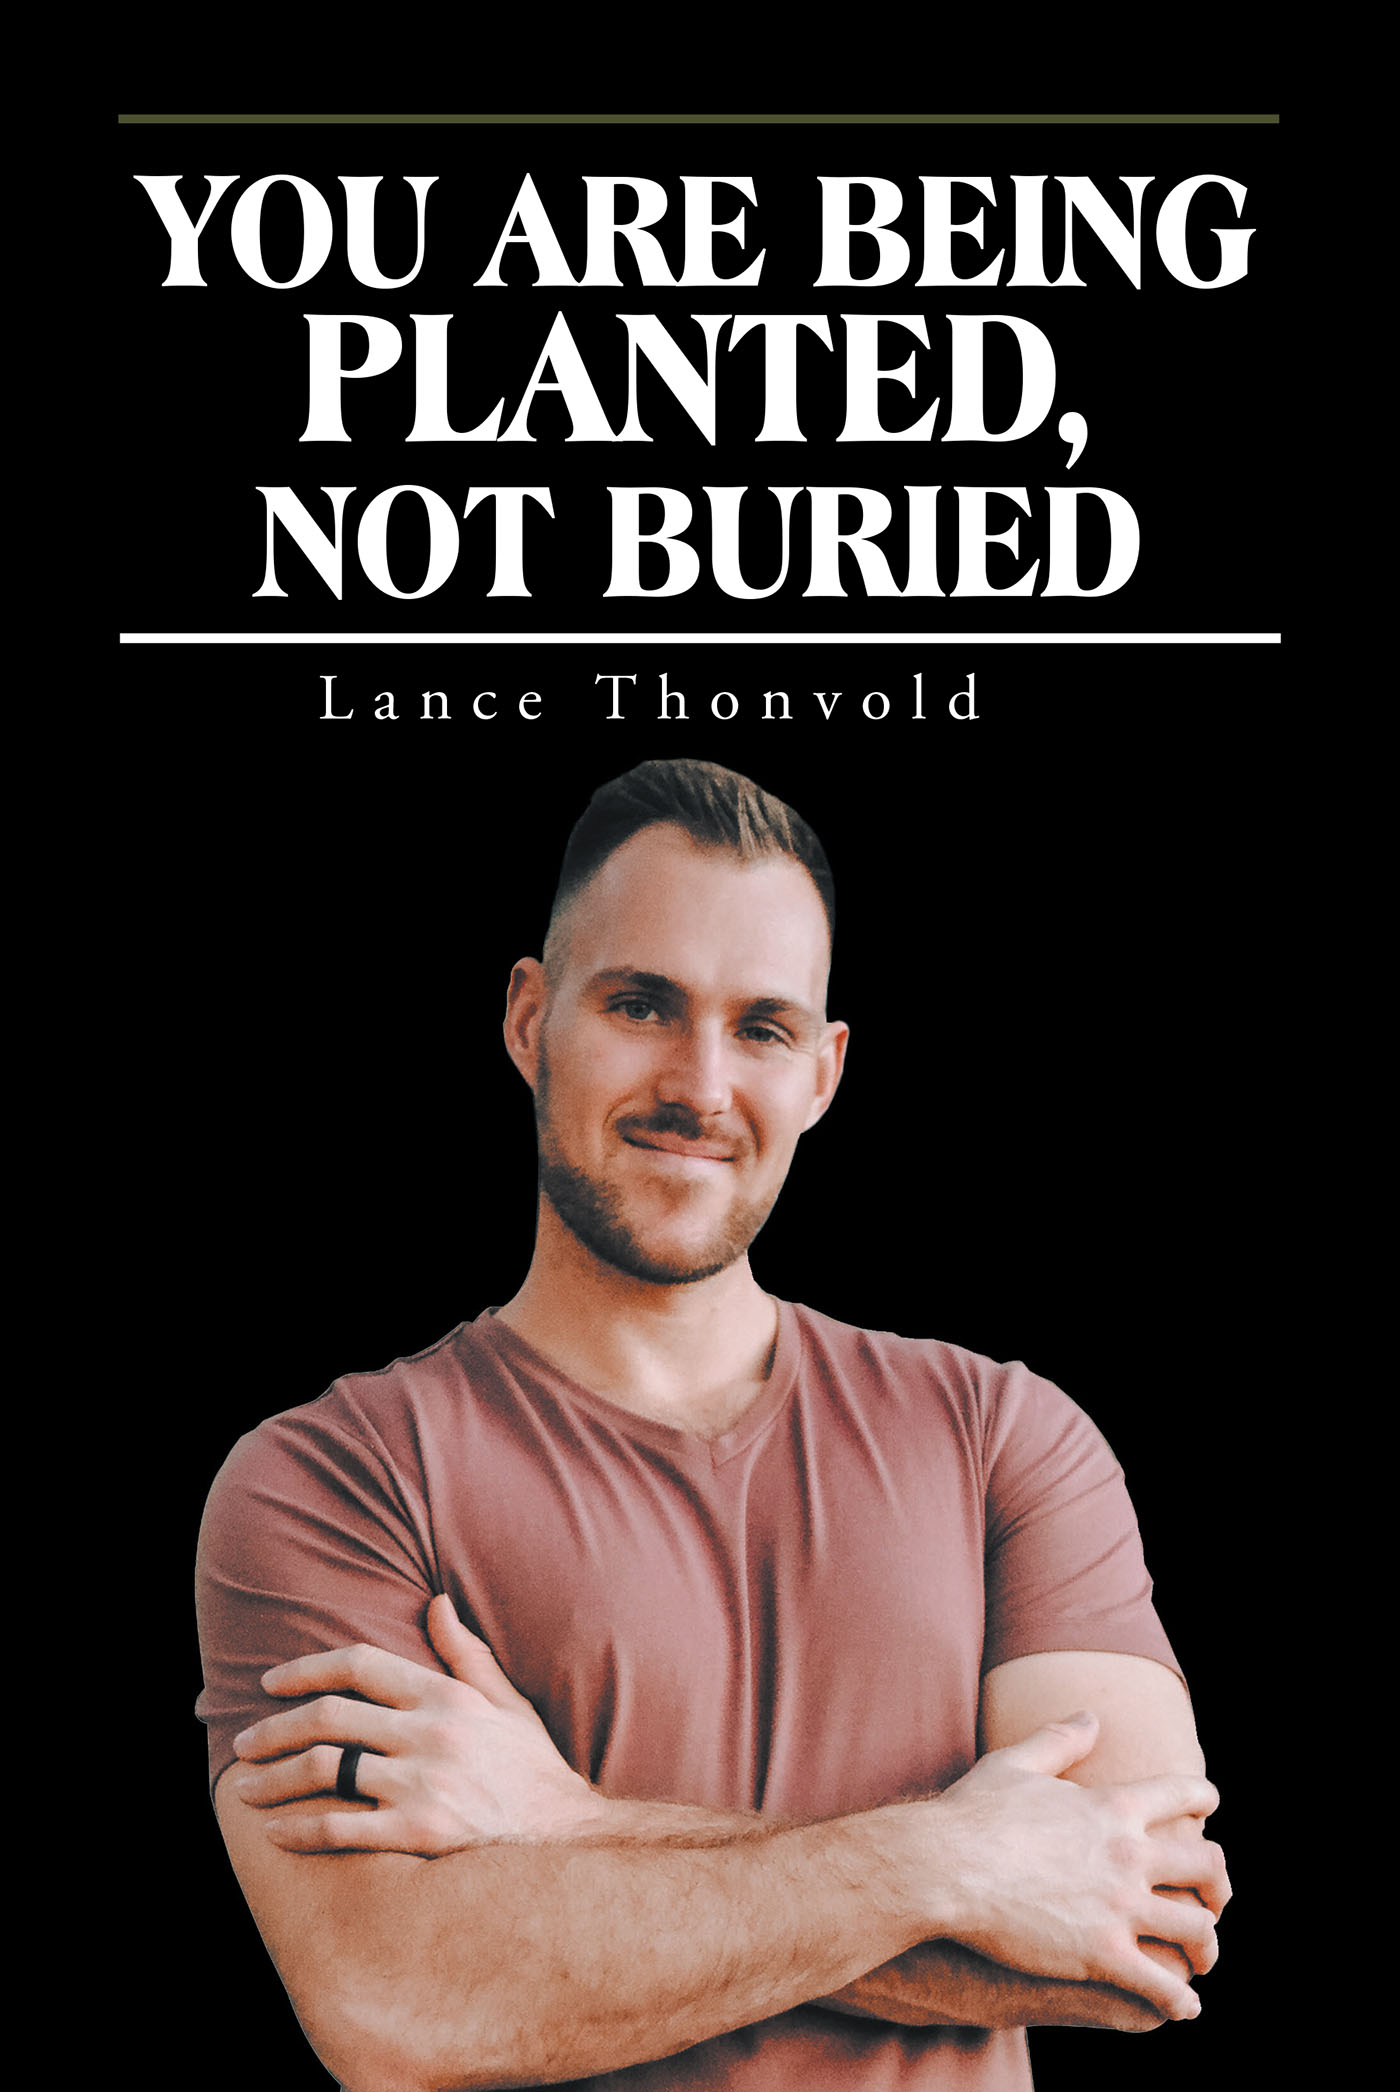 Lance Thonvold’s Newly Released "You Are Being Planted, Not Buried" is an Empowering Discussion of Where Our True Value Lies